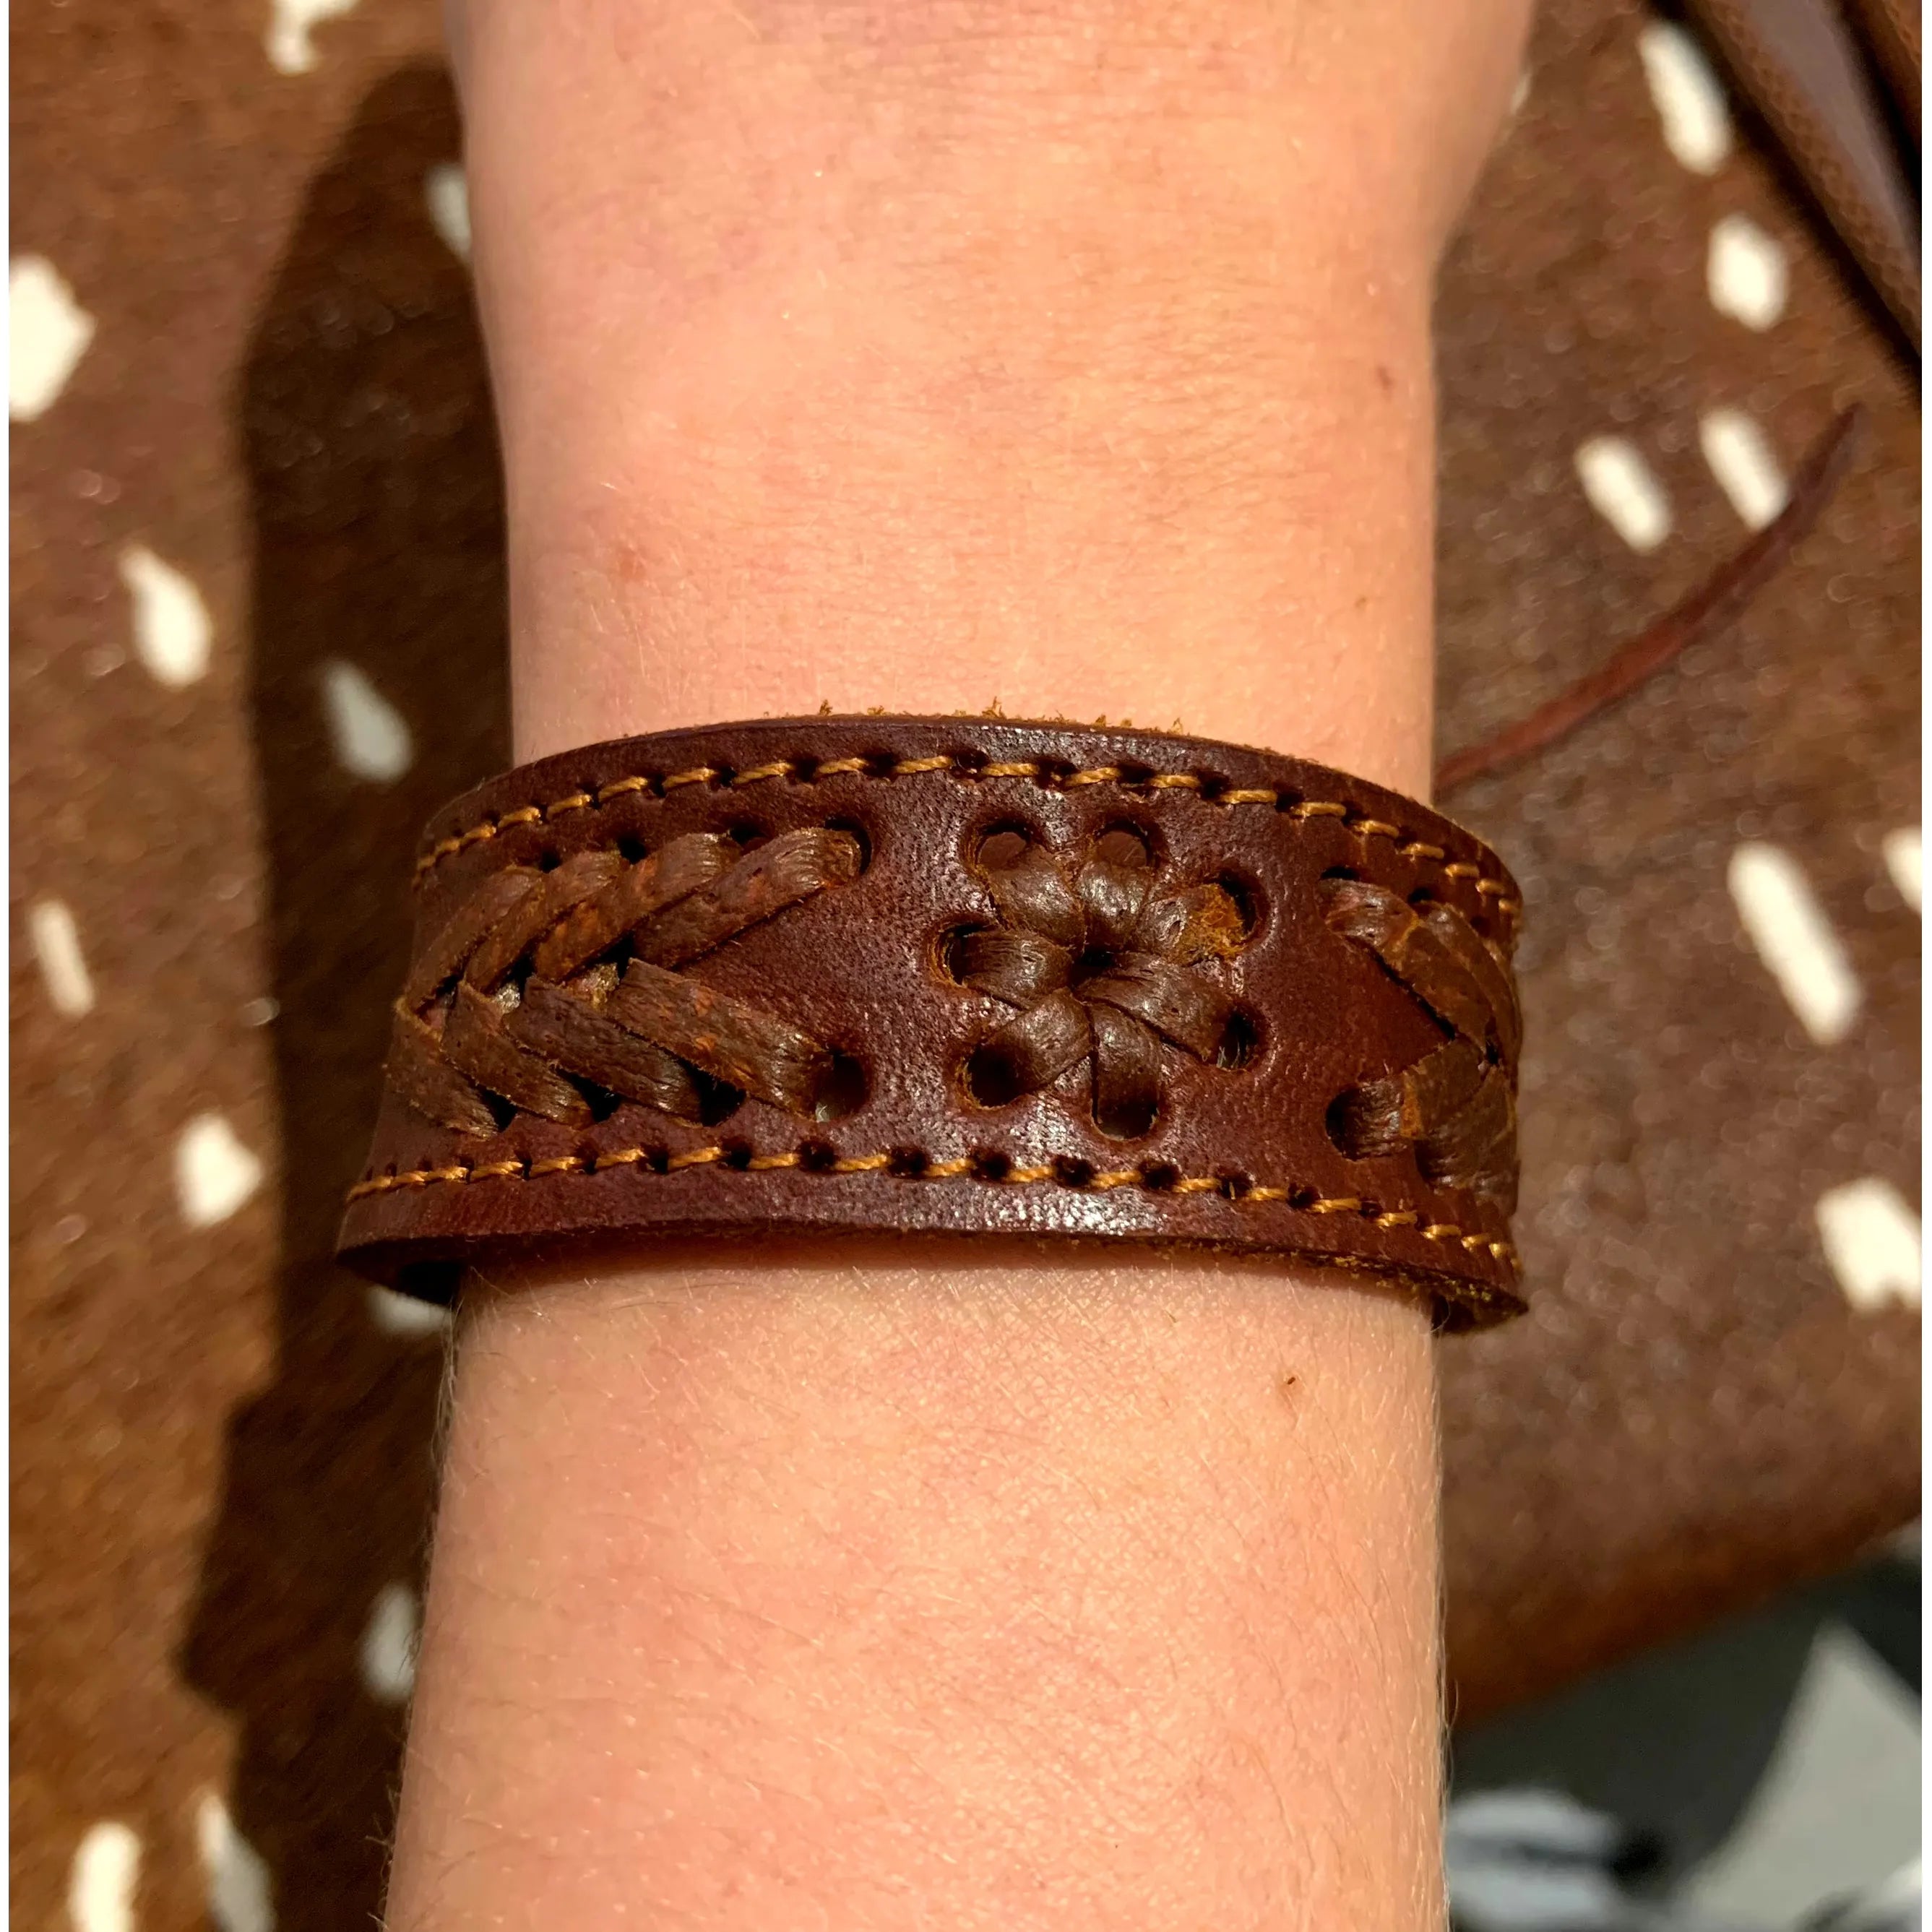 Leather Bands